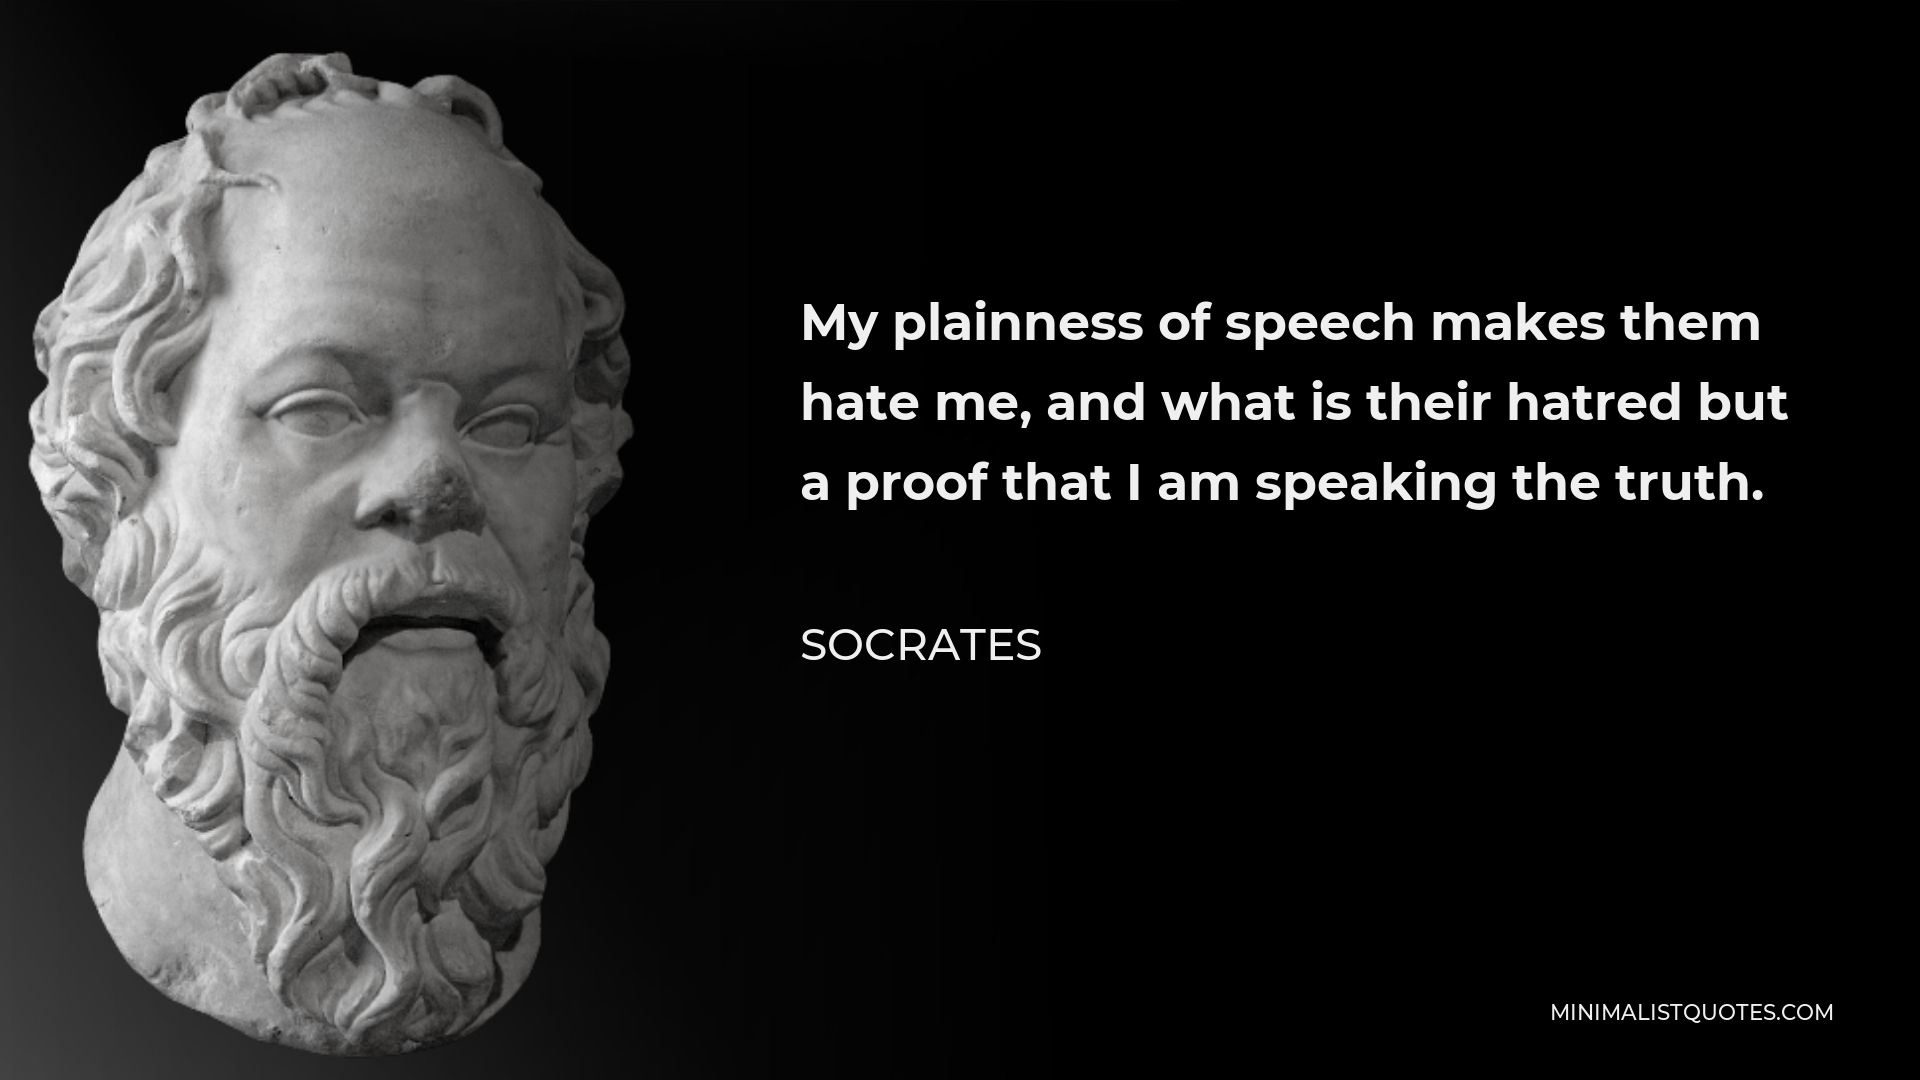 Socrates Quote - My plainness of speech makes them hate me, and what is their hatred but a proof that I am speaking the truth.